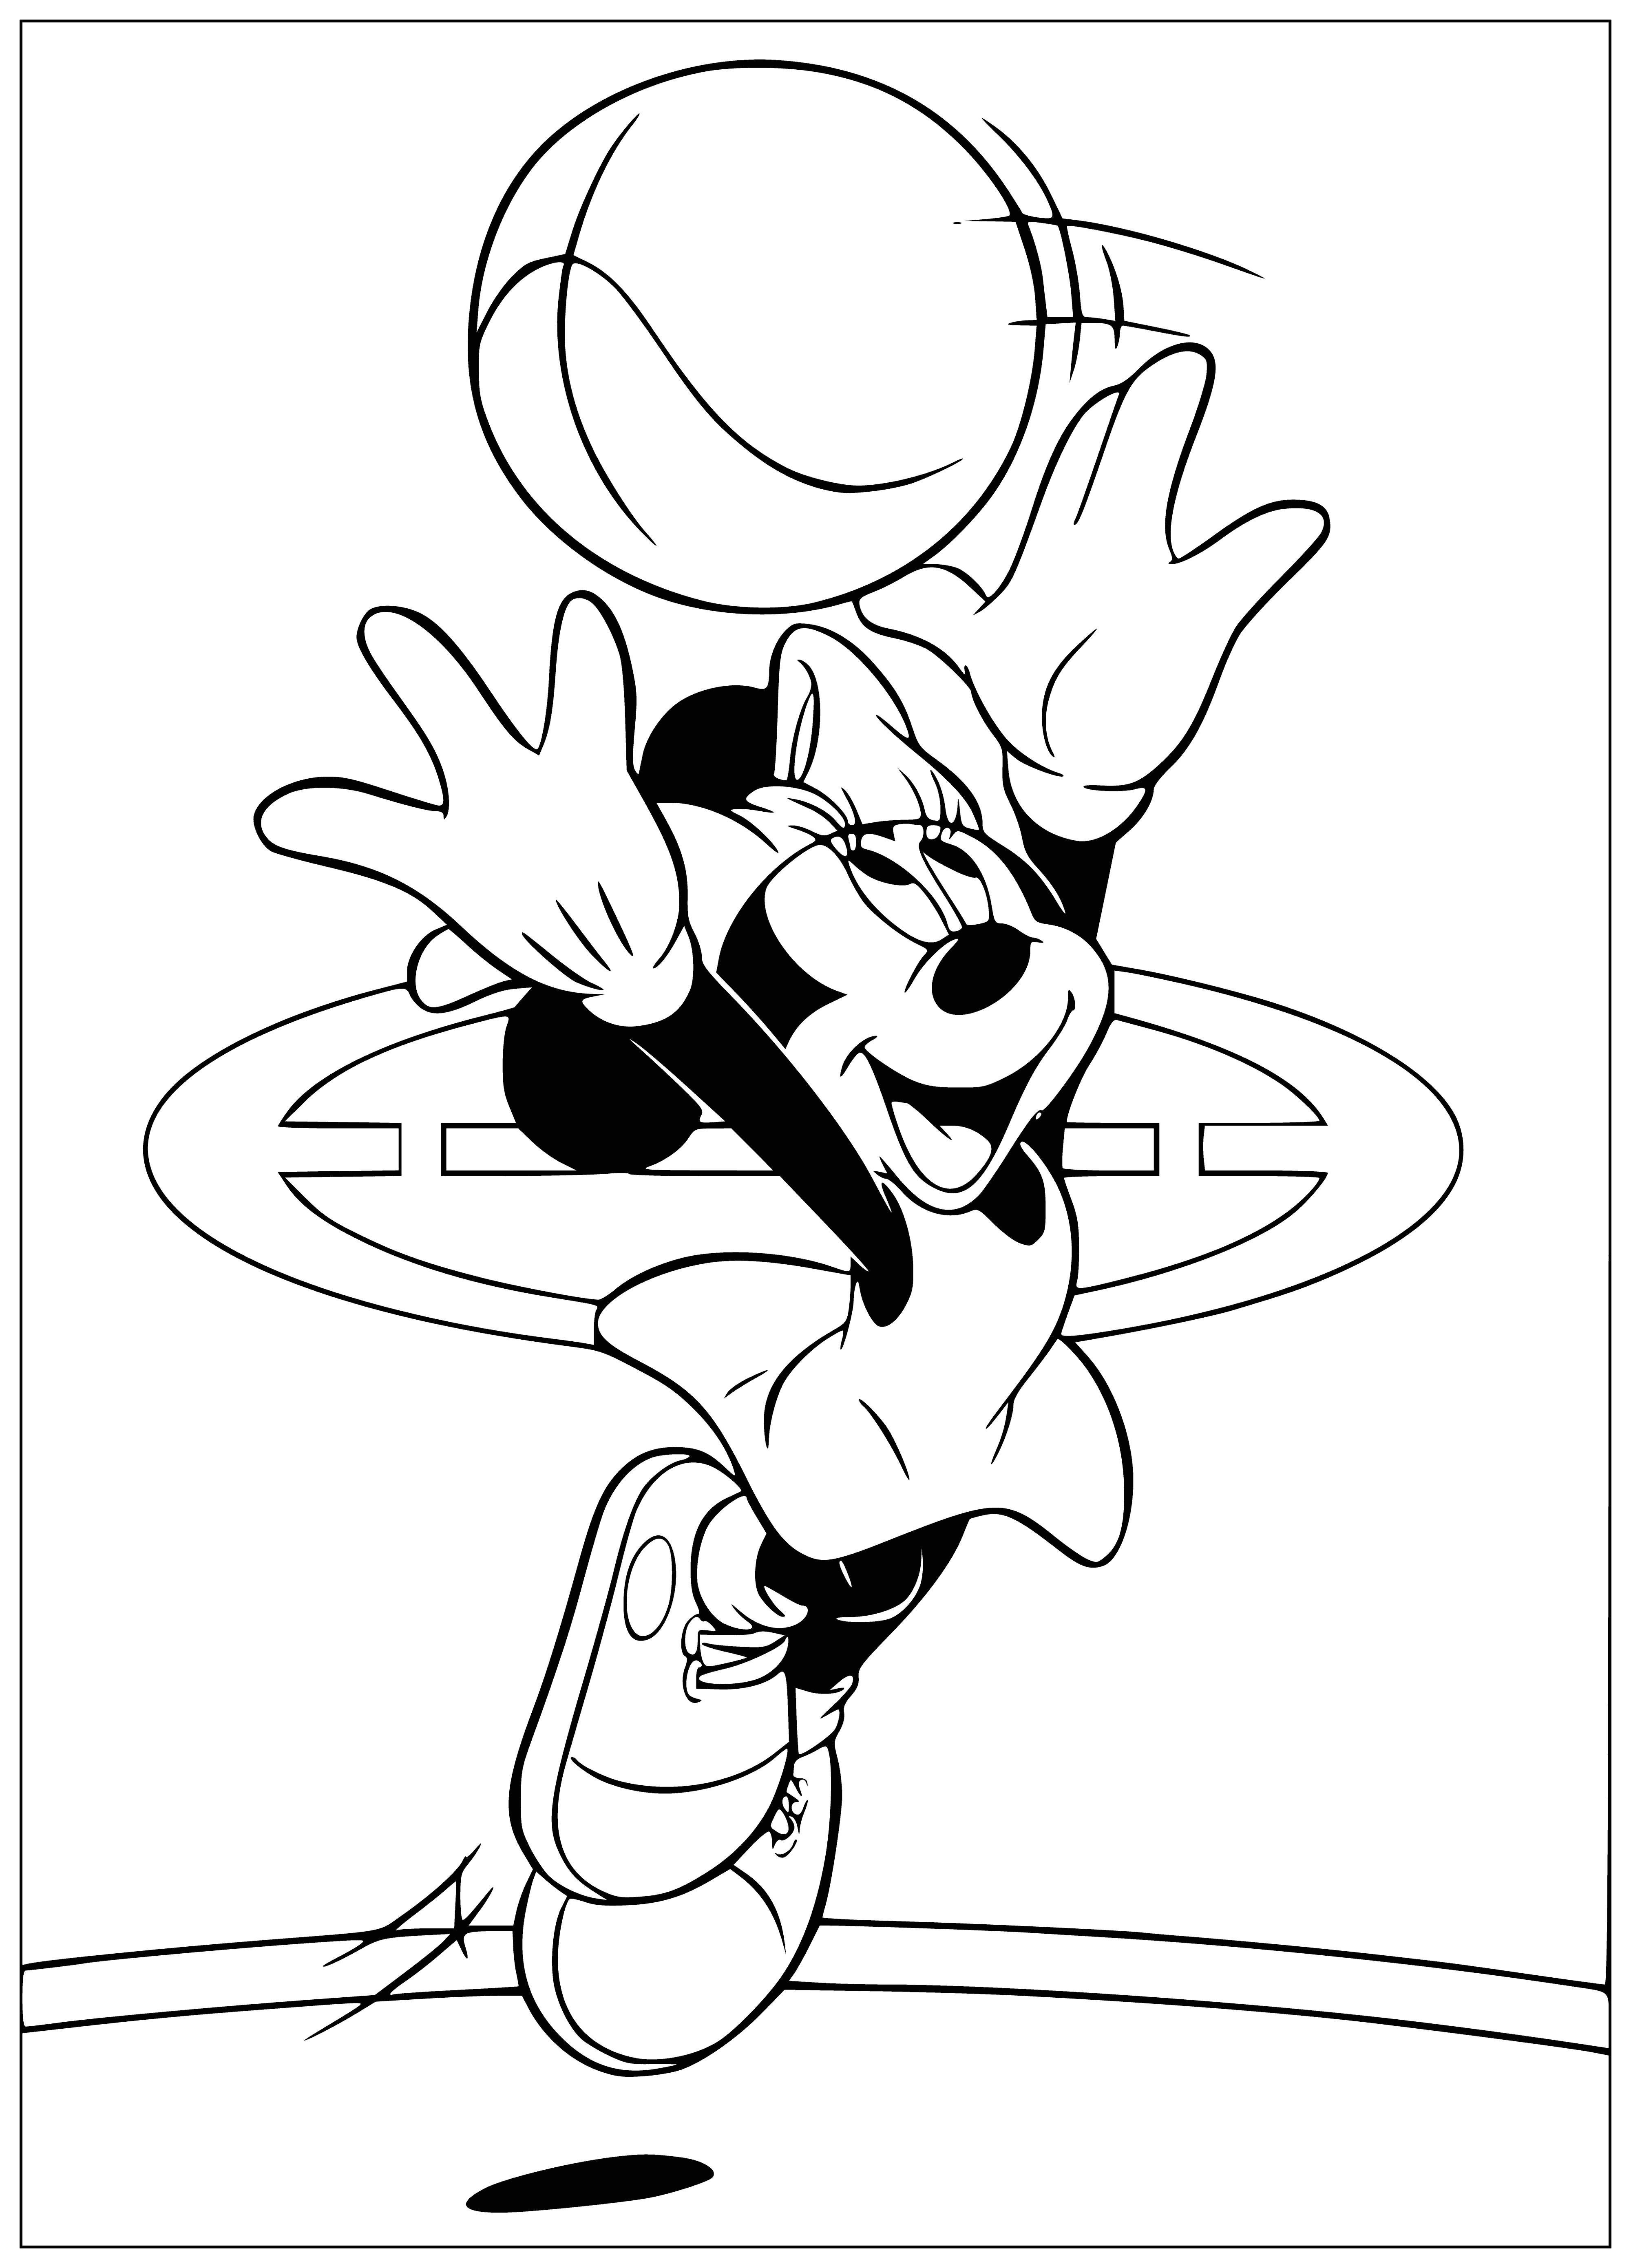 coloring page: Mickey, Minnie & friends are playing basketball with Donald coaching & Goofy chasing the ball. Pluto watches on the sidelines.